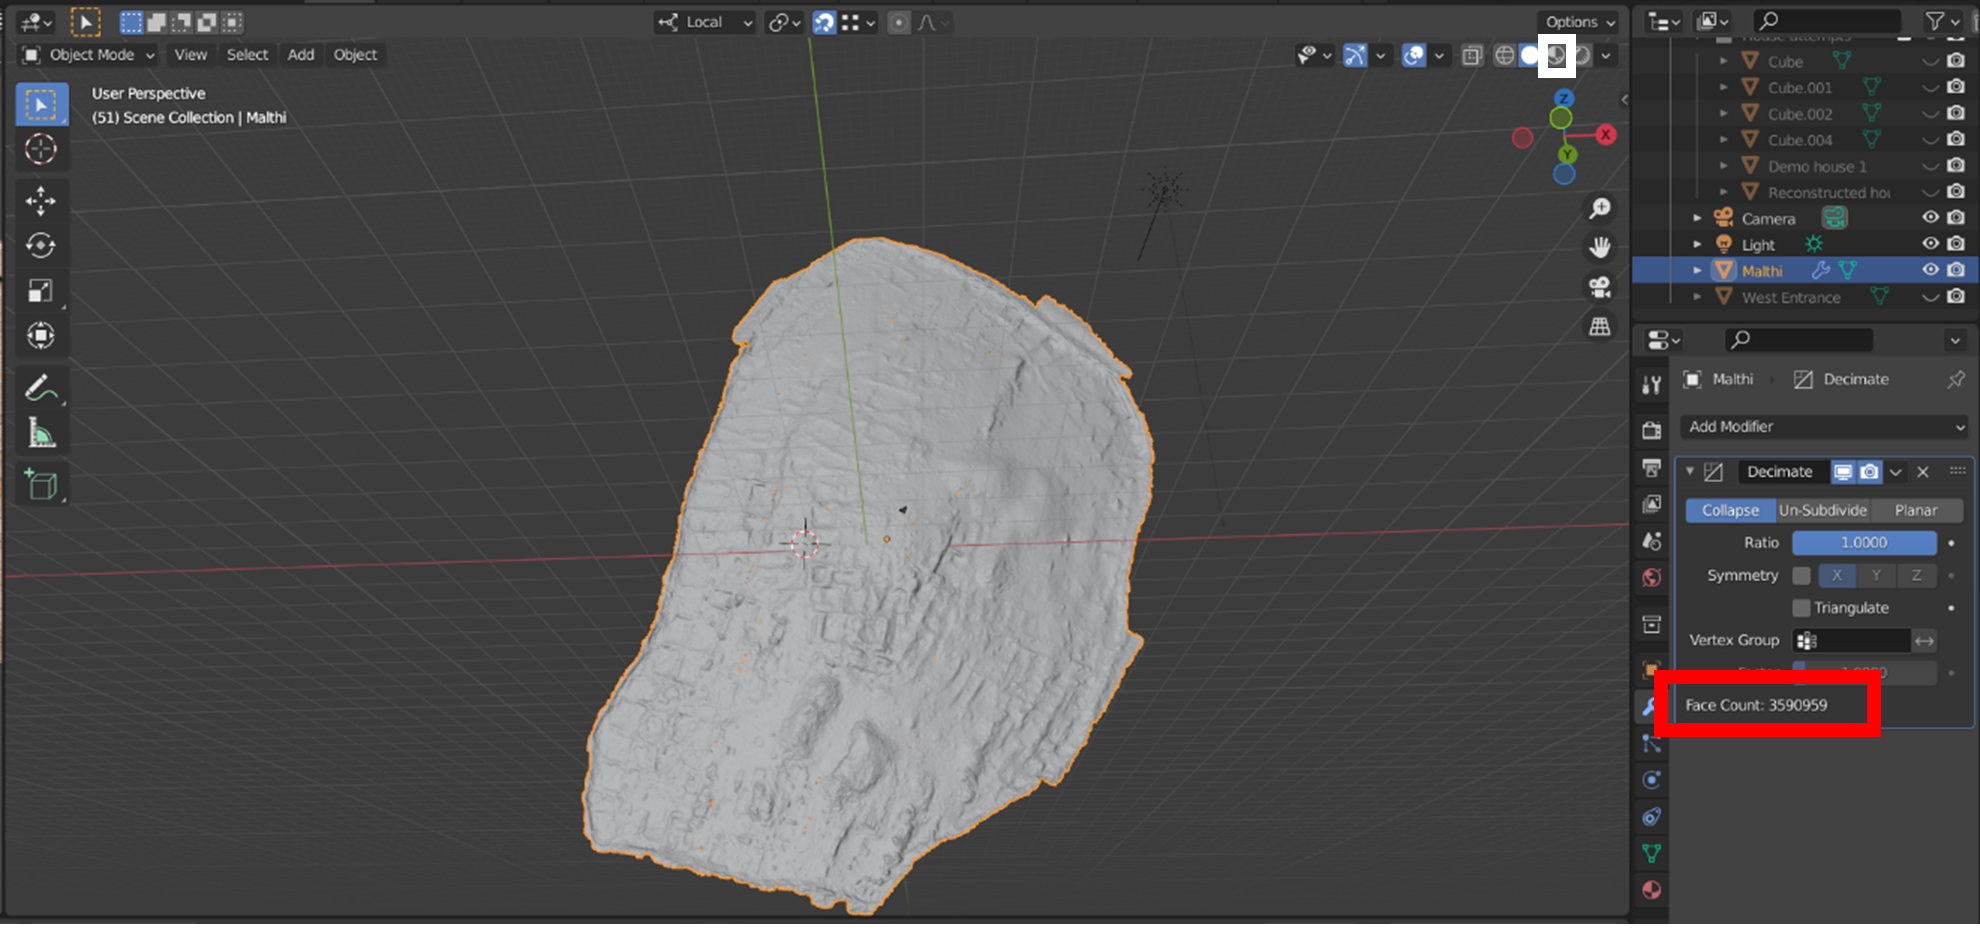 Change the ratio to decimate your mesh to lower levels of detail - which gets you close to 50000 faces?